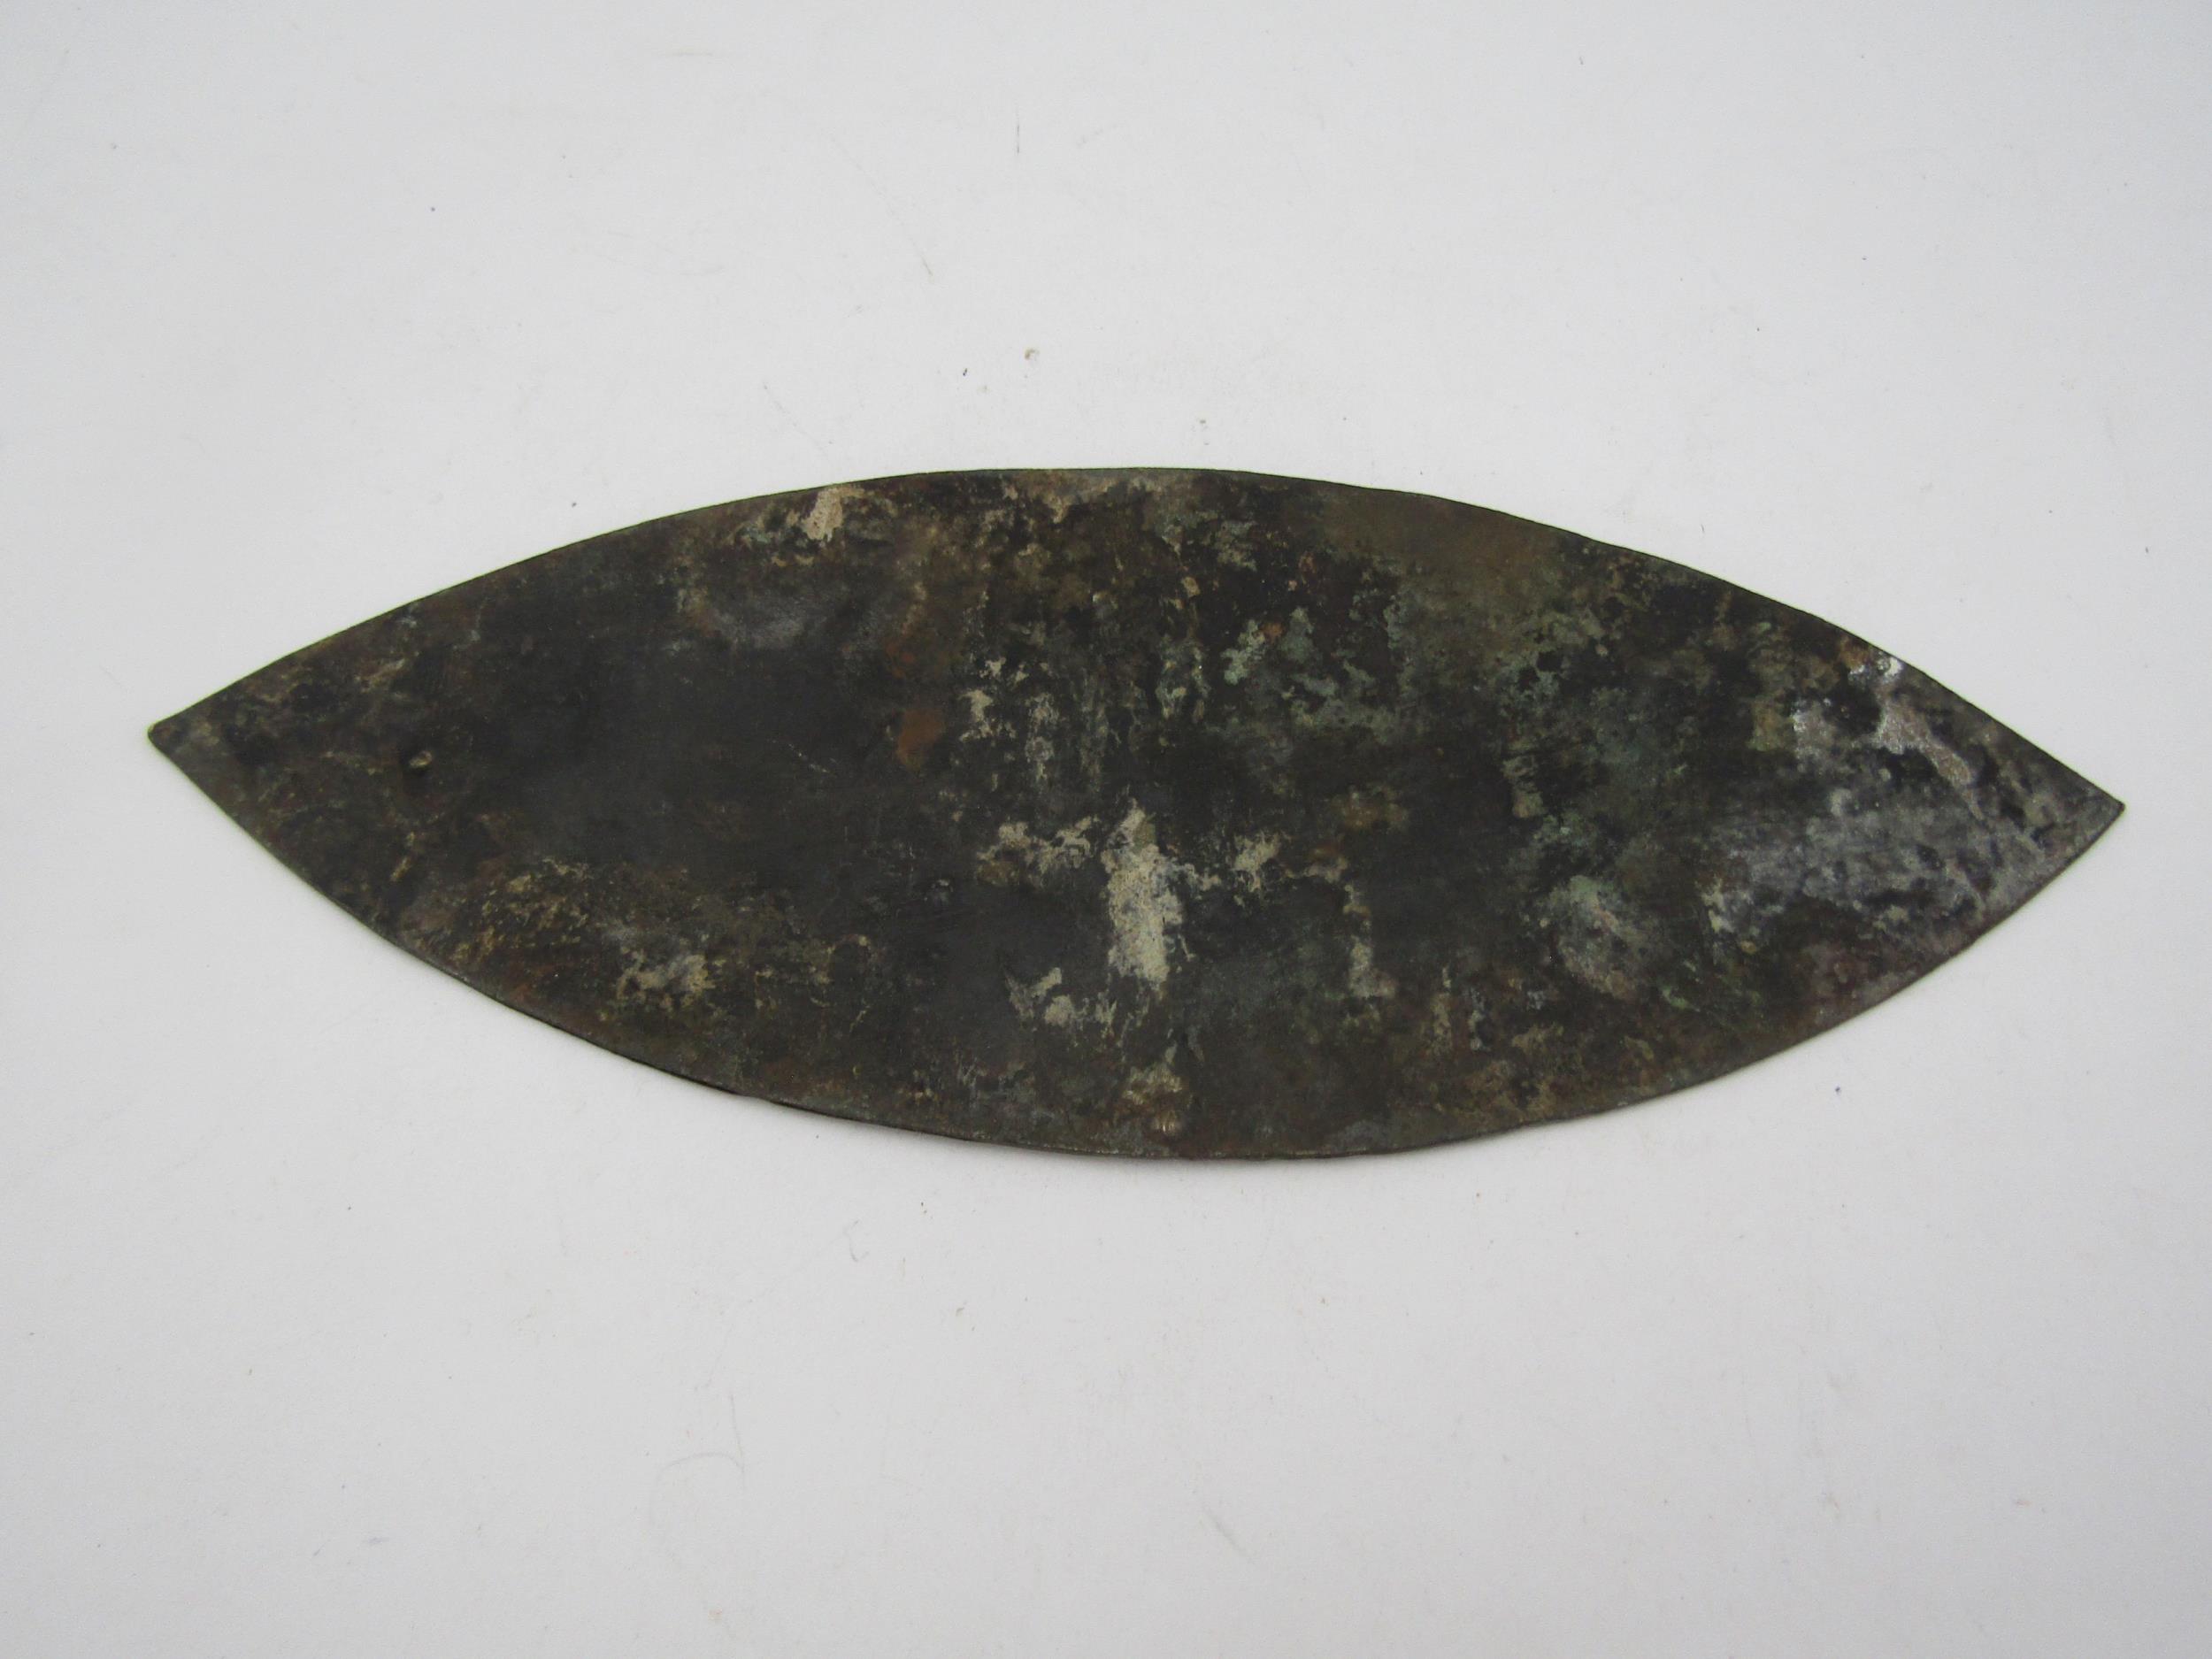 A brass wagon plate - H. JEFFRIES Empty, Acle LNER - Image 2 of 2